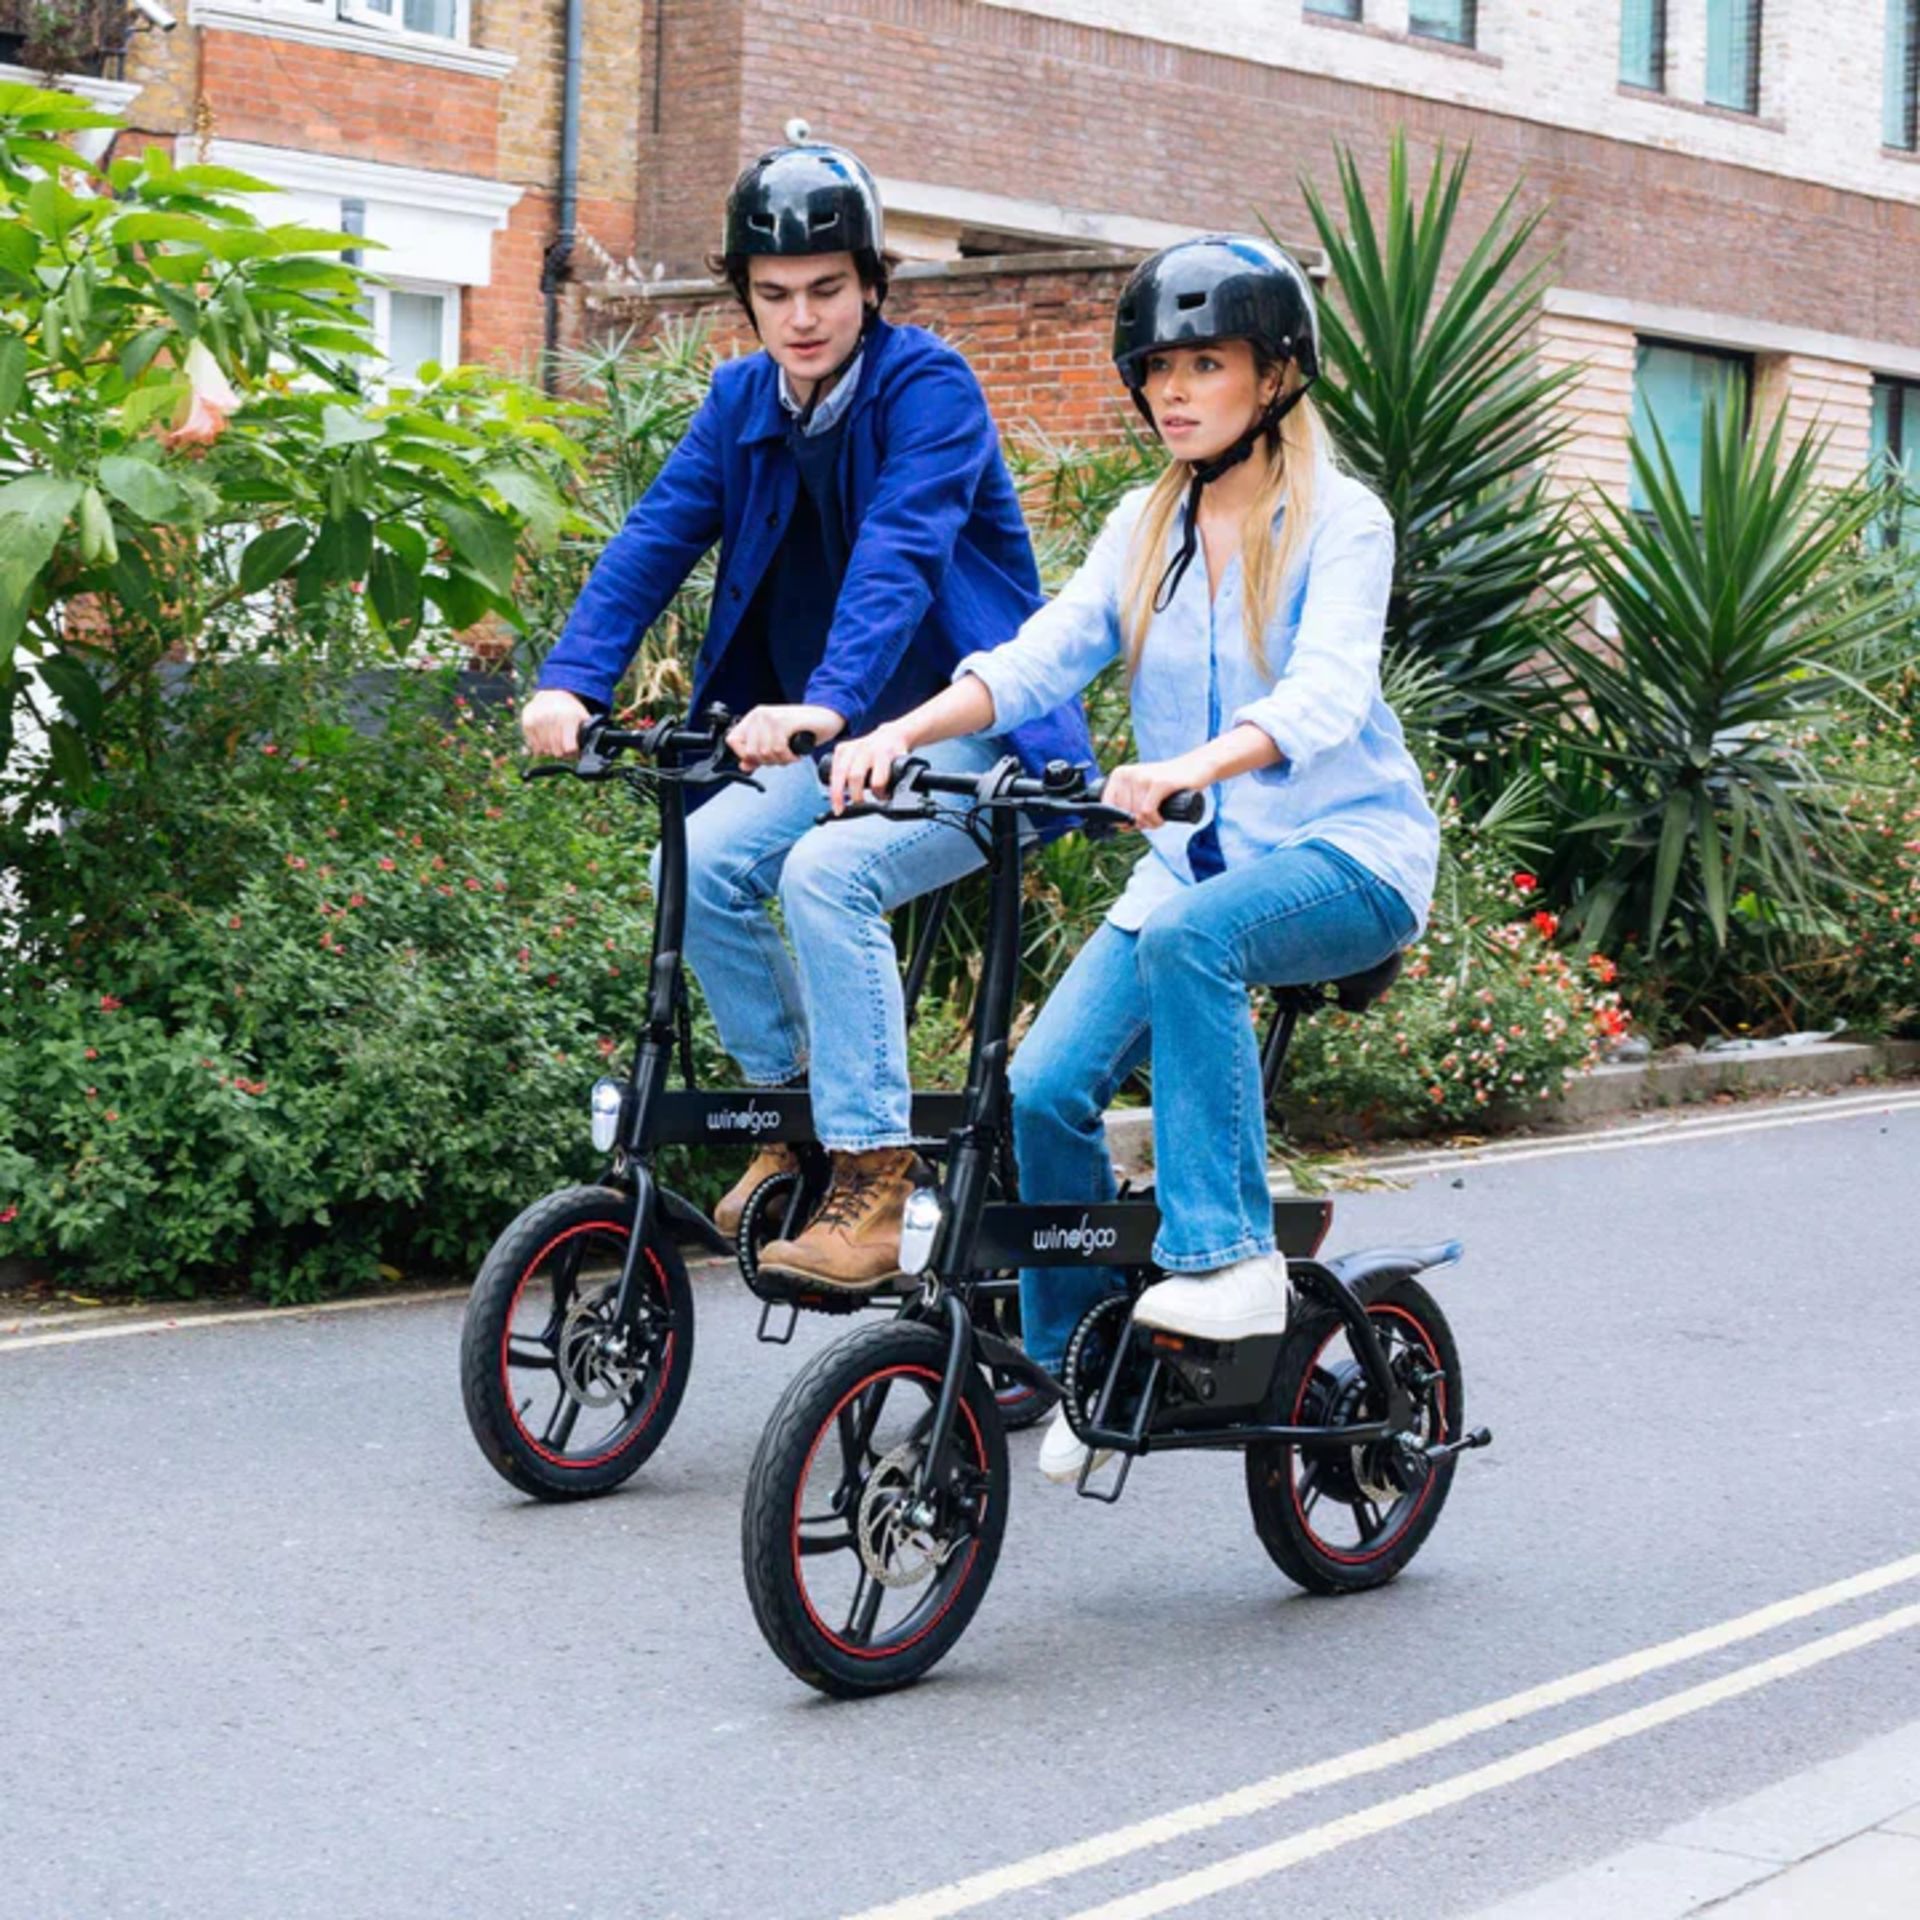 BRAND NEW Windgoo B20 Pro Electric Bike. RRP £1,100.99. With 16-inch-wide tires and a frame of - Image 4 of 6